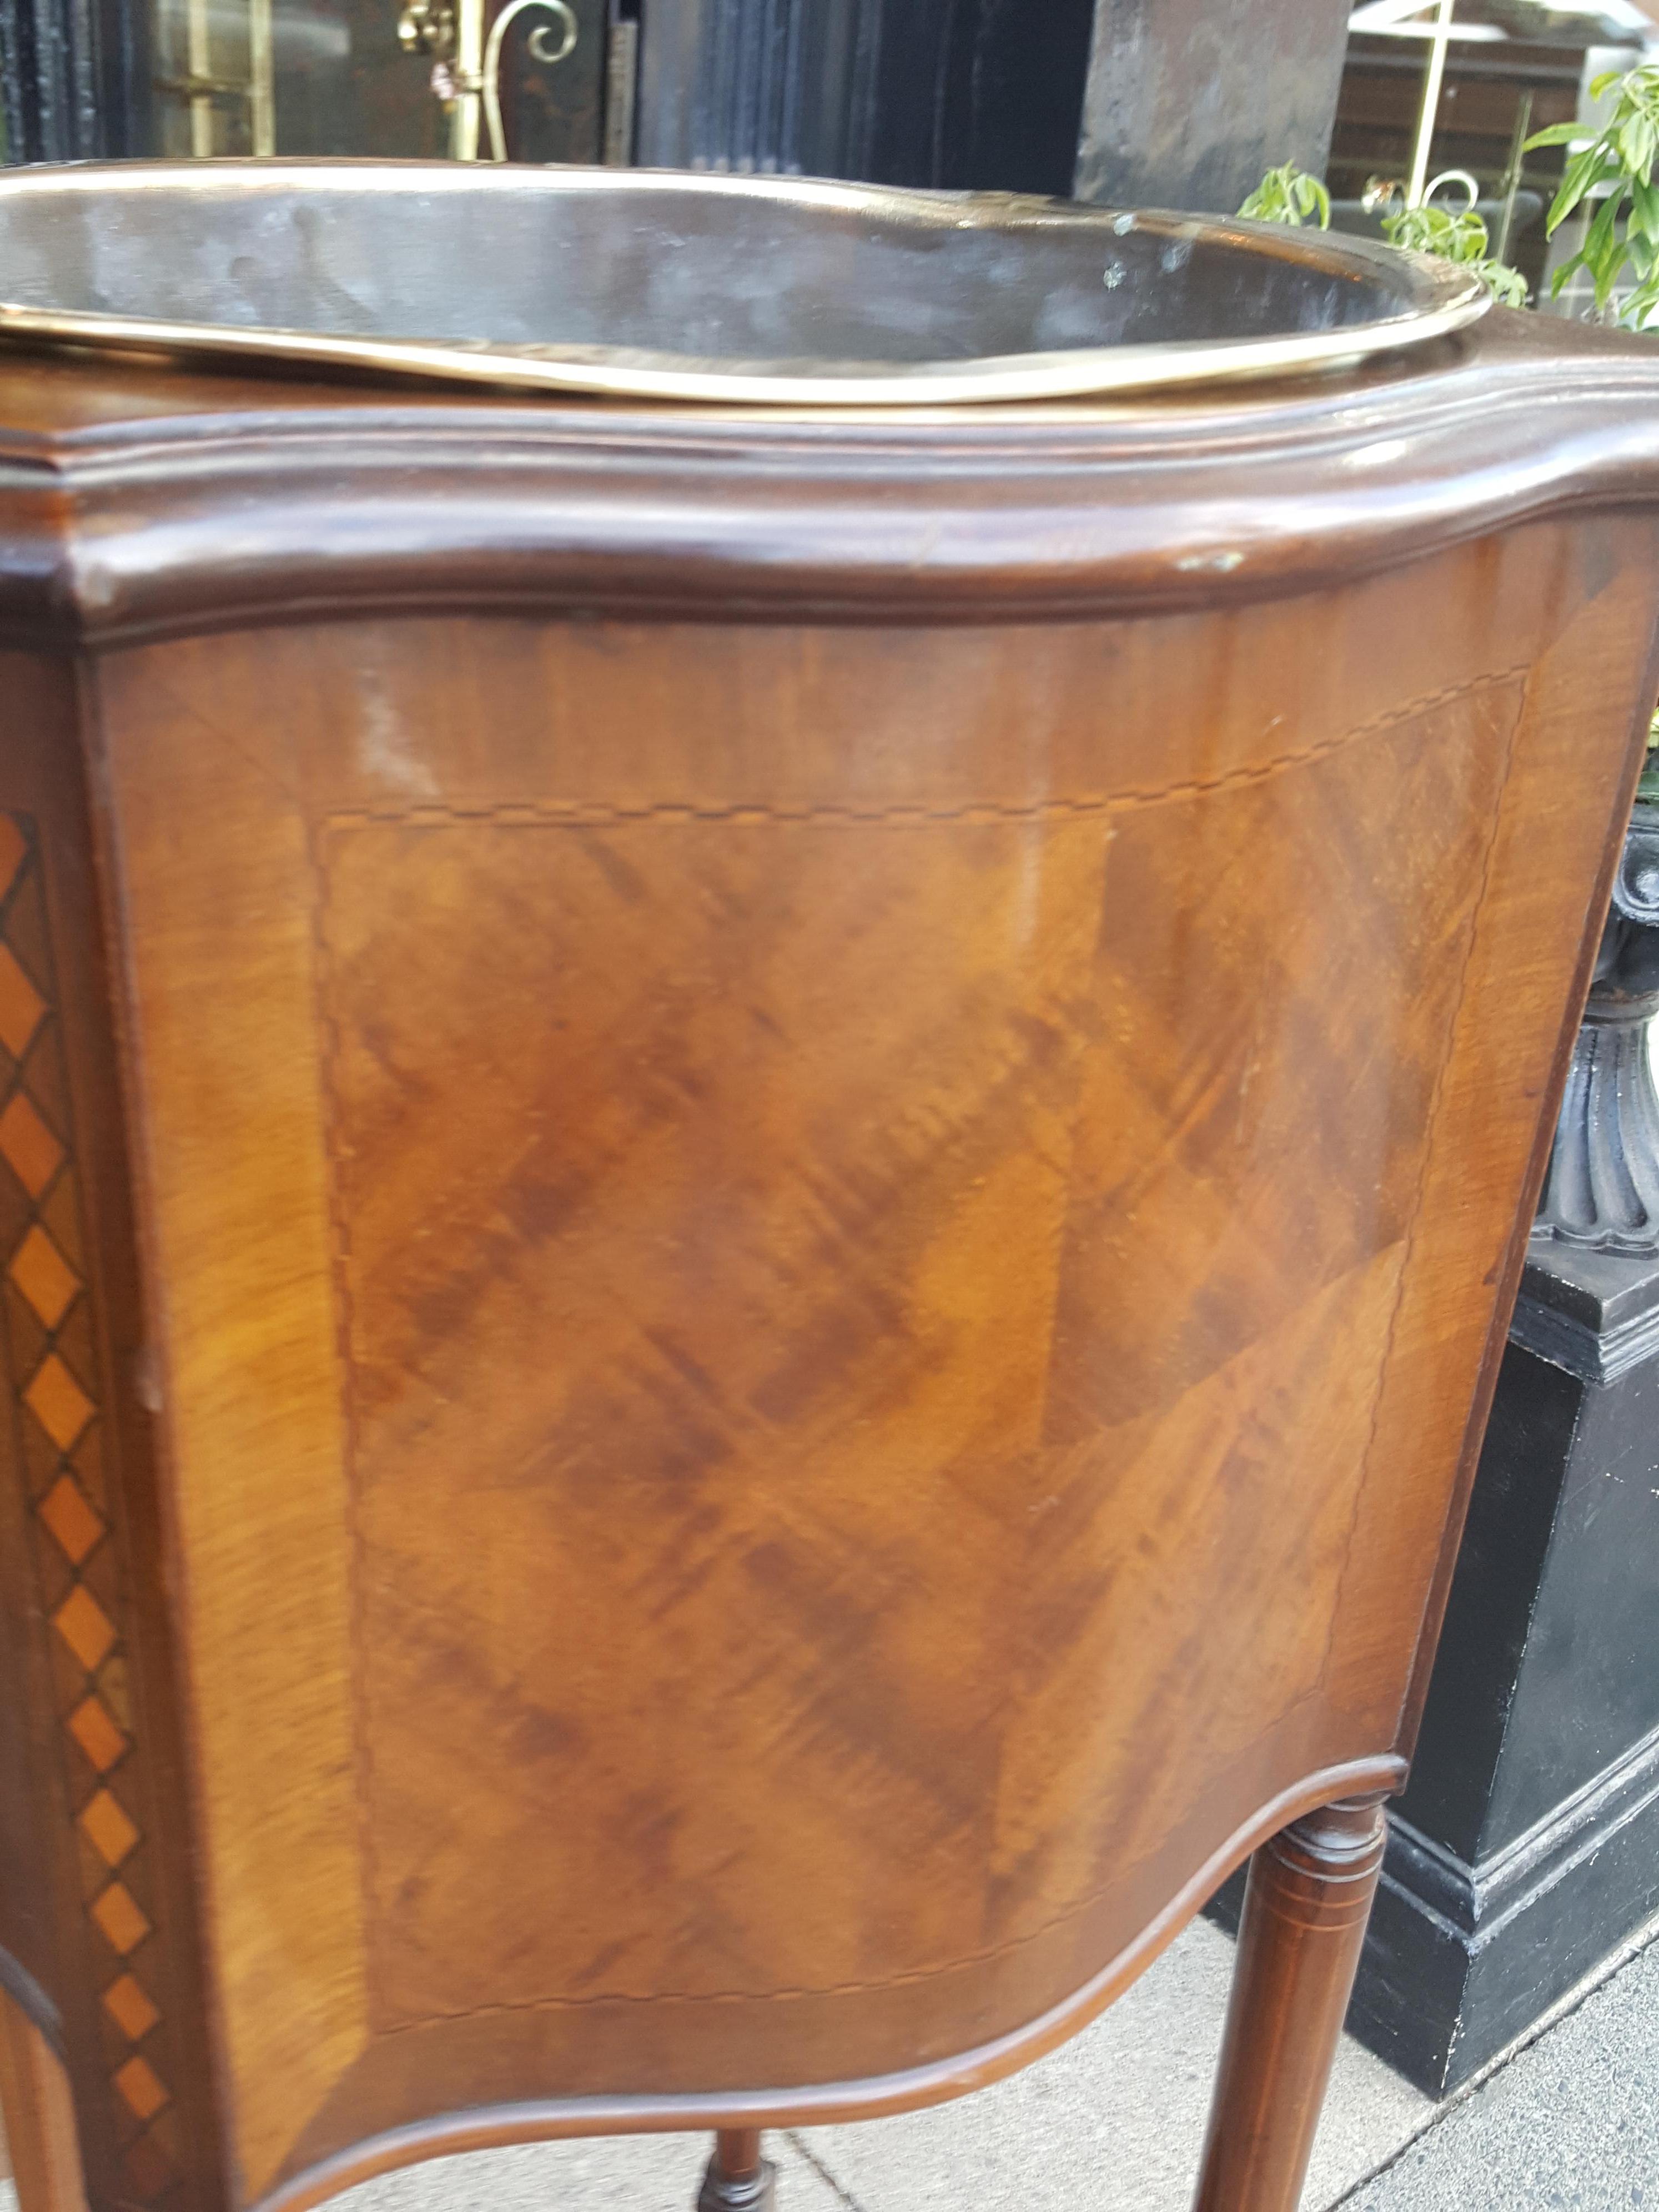 Edwardian Inlaid Mahogany Jardiniere Planter In Good Condition For Sale In Altrincham, Cheshire